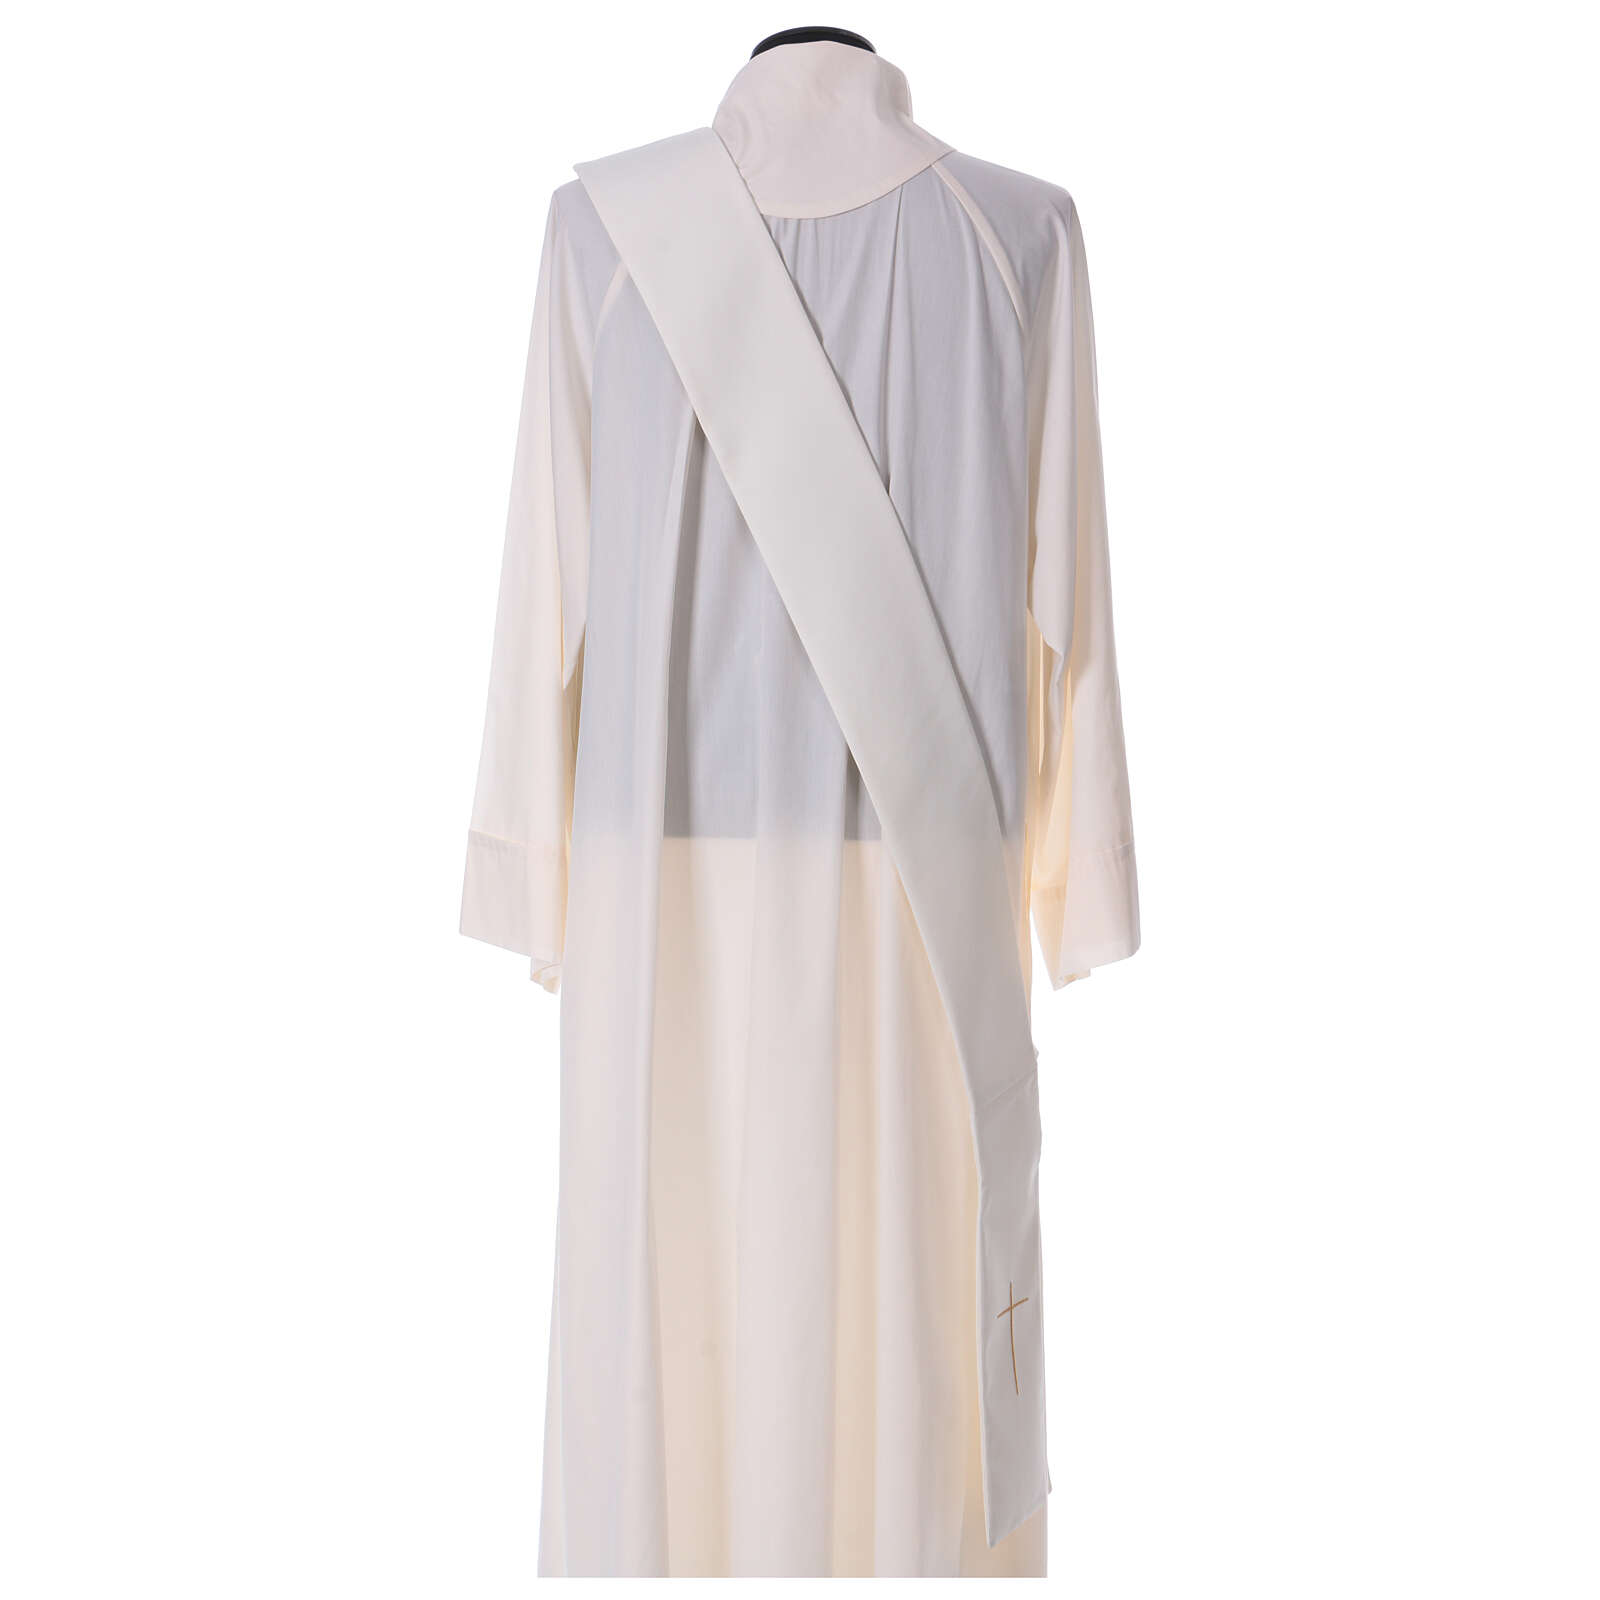 Ivory dalmatic with Marian crown 100% polyester | online sales on ...